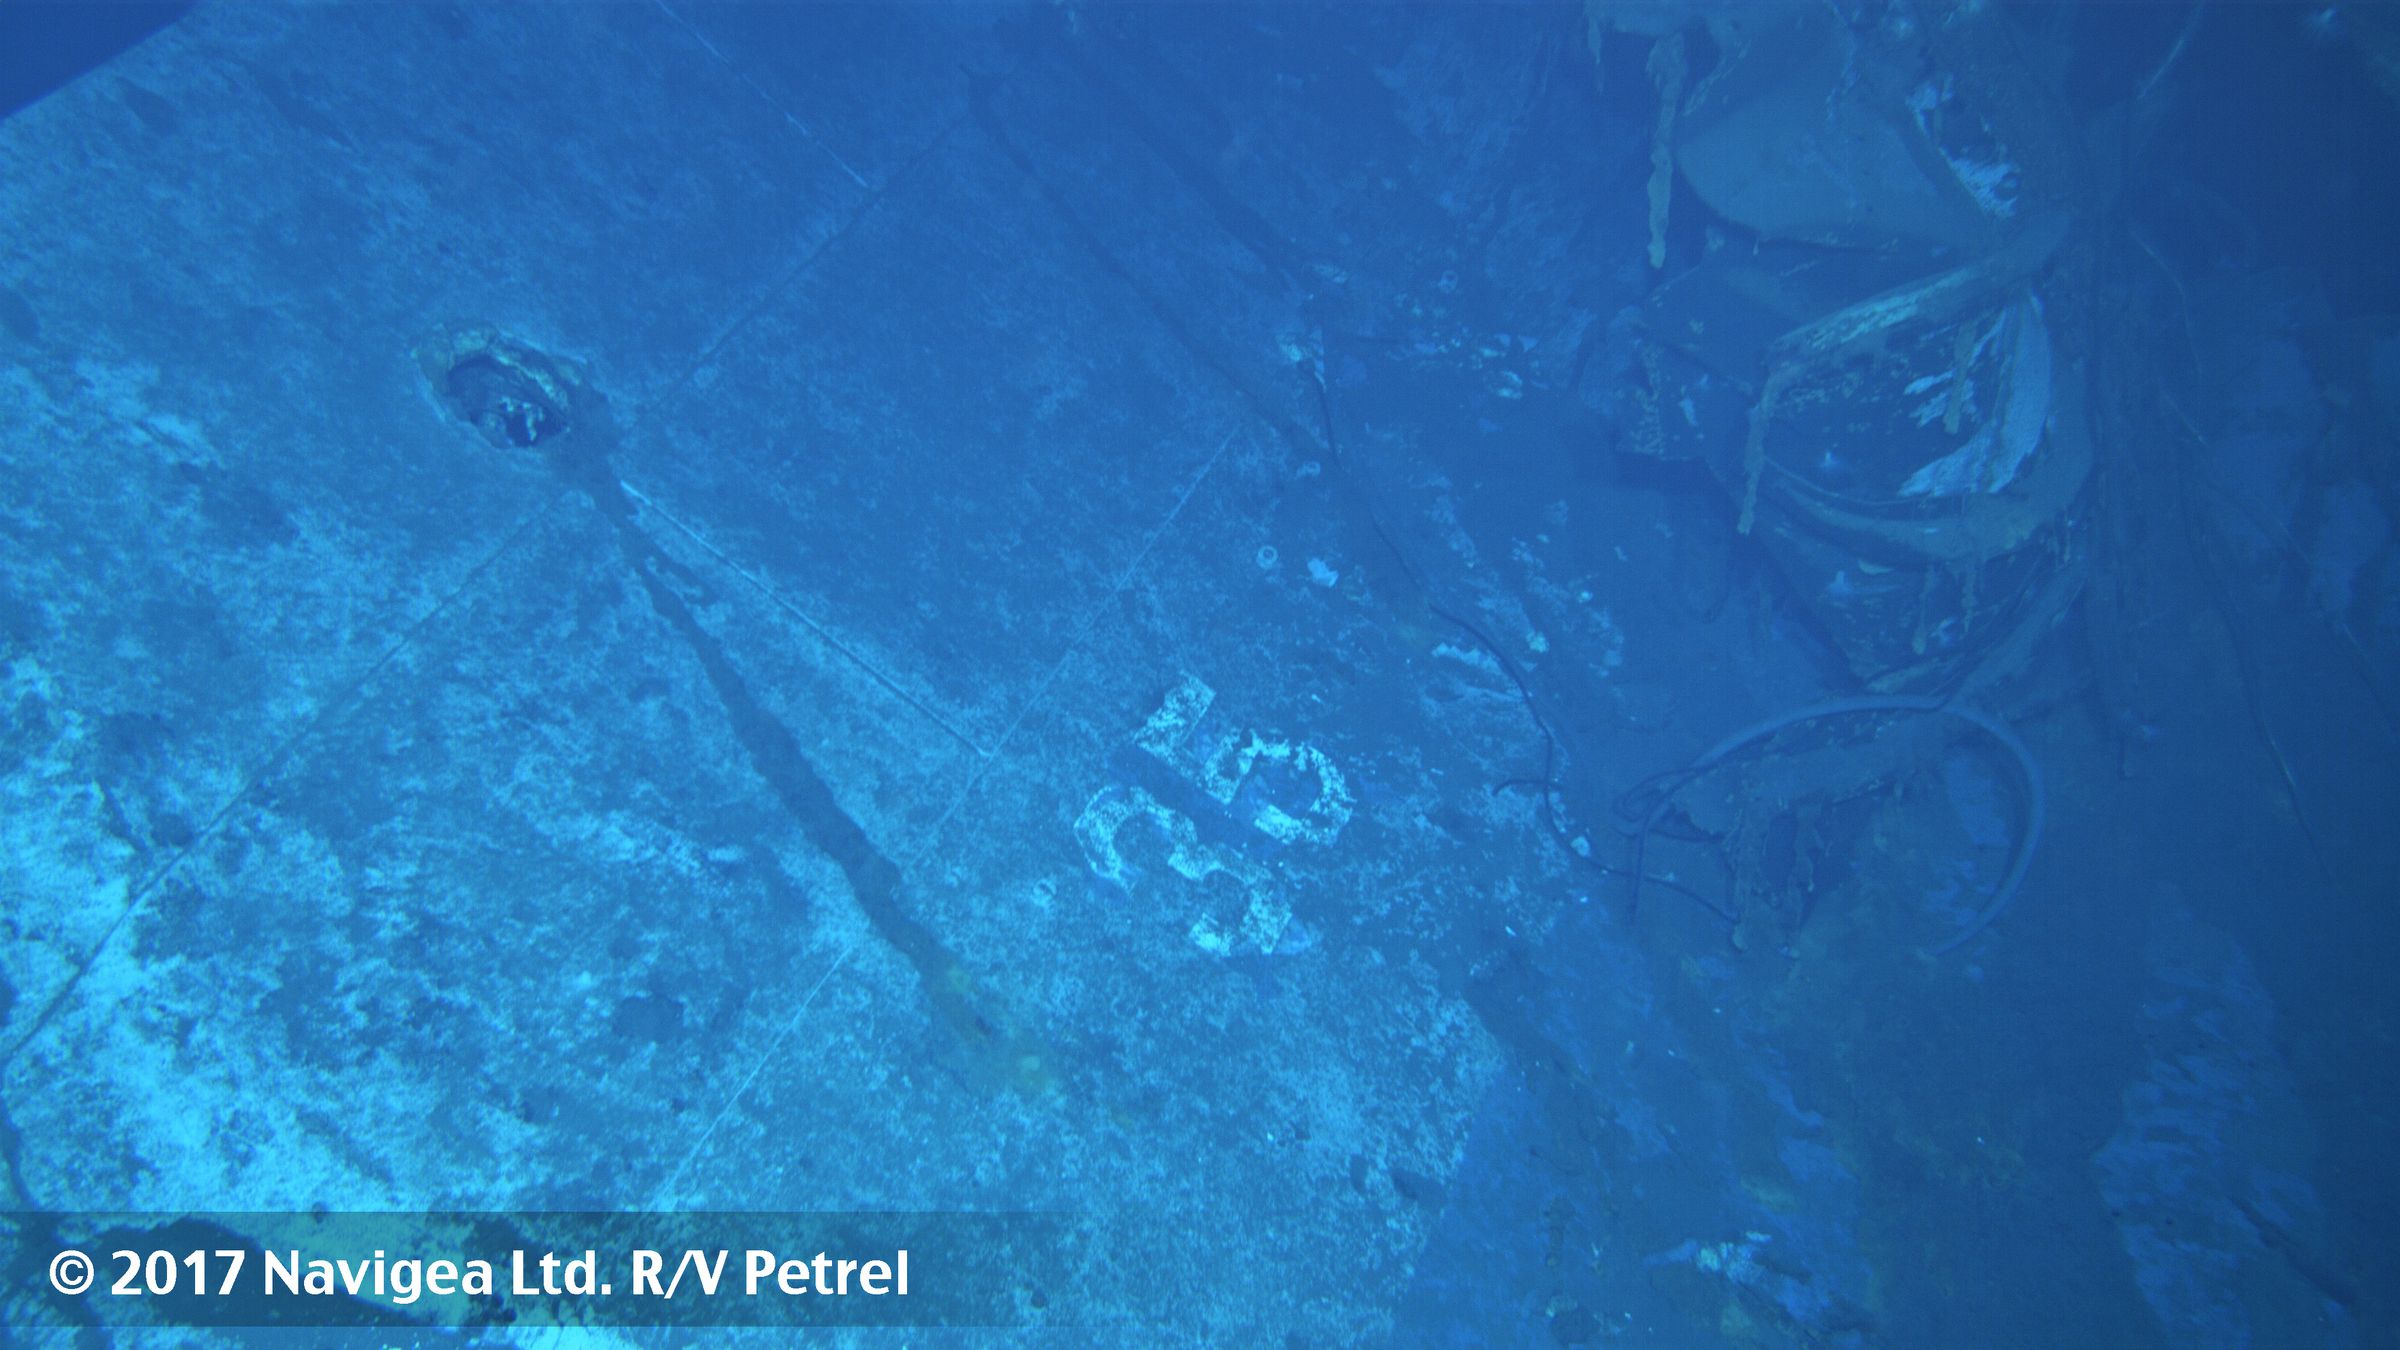 An image shot from a remotely operated vehicle shows what appears to be the painted hull number "35." Based on the curvature of the hull section, this seems to be the port side of the ship.  Using this photo as a reference, the number is painted in the same font, and the "3" aligns with the circular feature above it in both photos. 